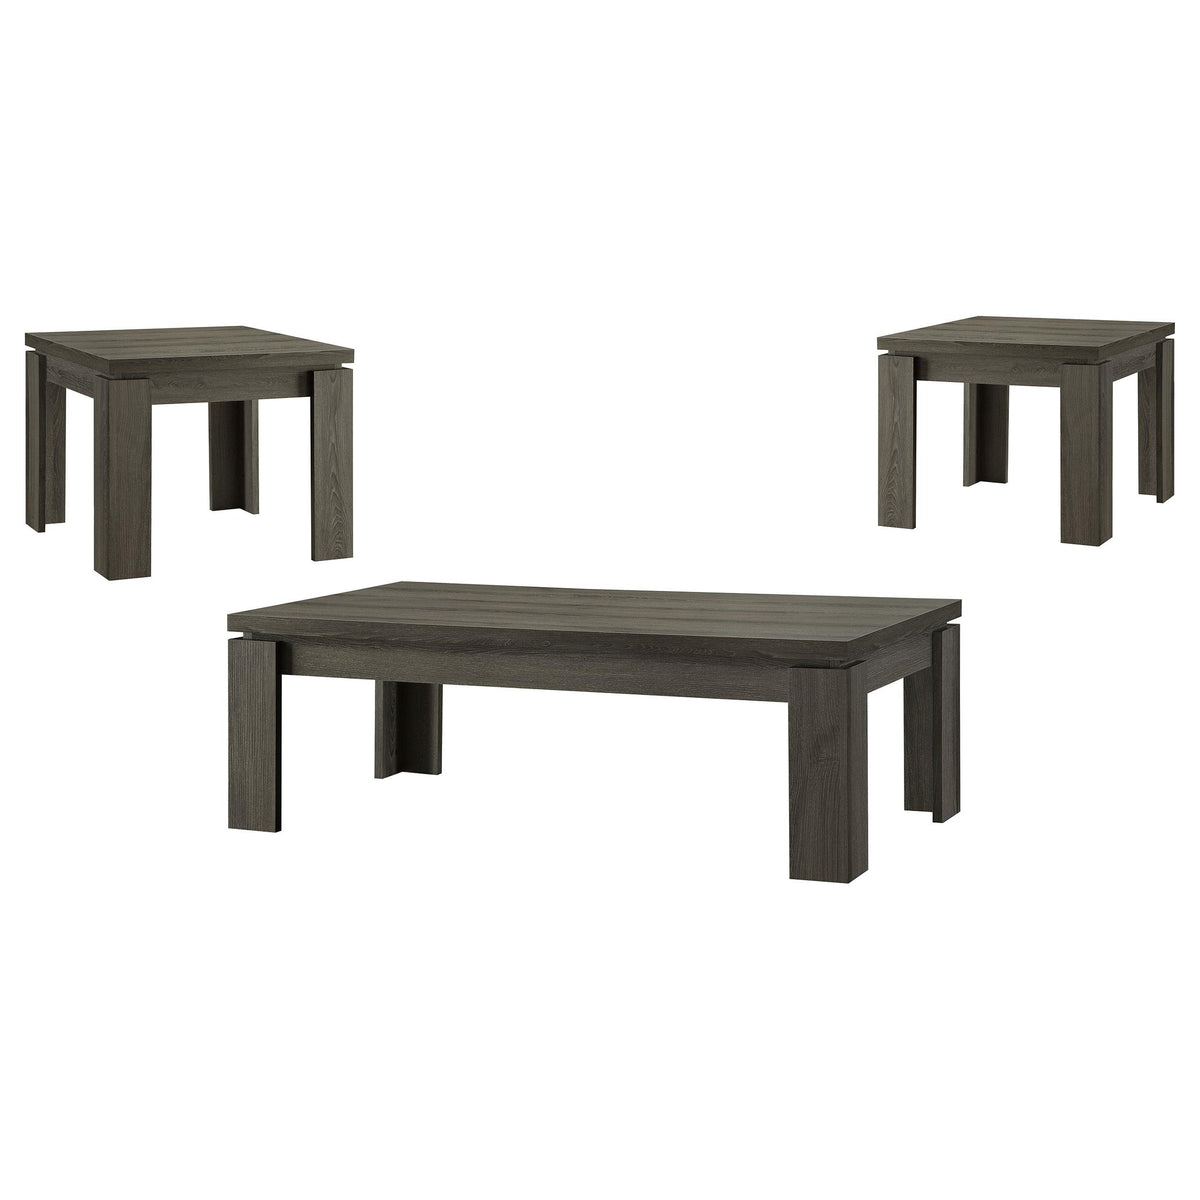 Cain 3-piece Occasional Table Set Weathered Grey Cain 3-piece Occasional Table Set Weathered Grey Half Price Furniture